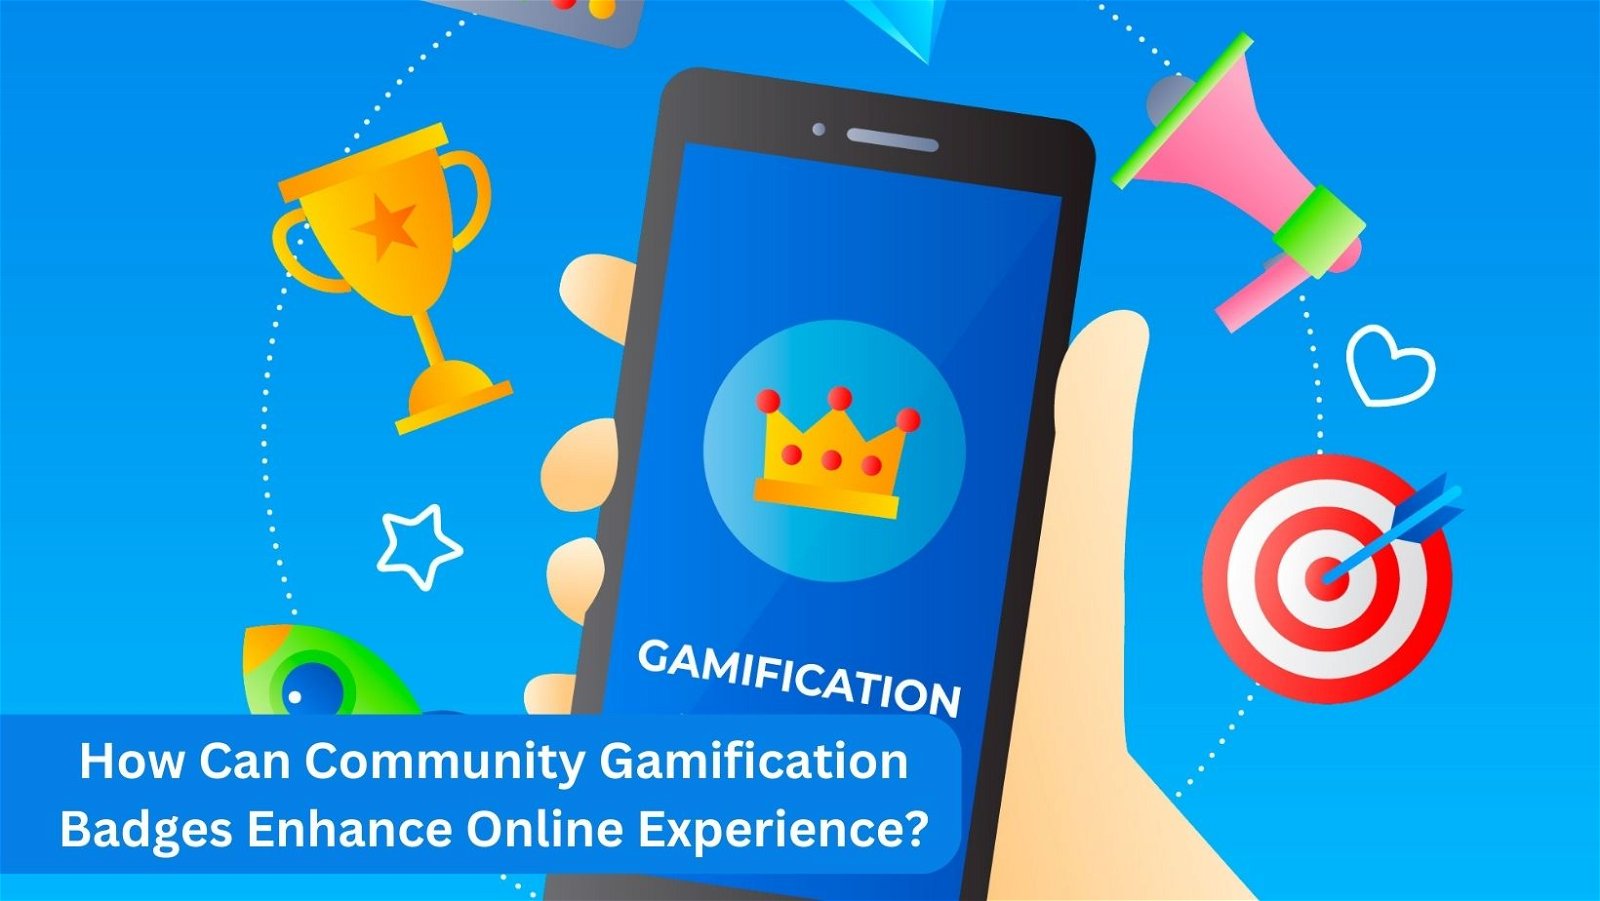 How Can Community Gamification Badges Enhance Online Experience